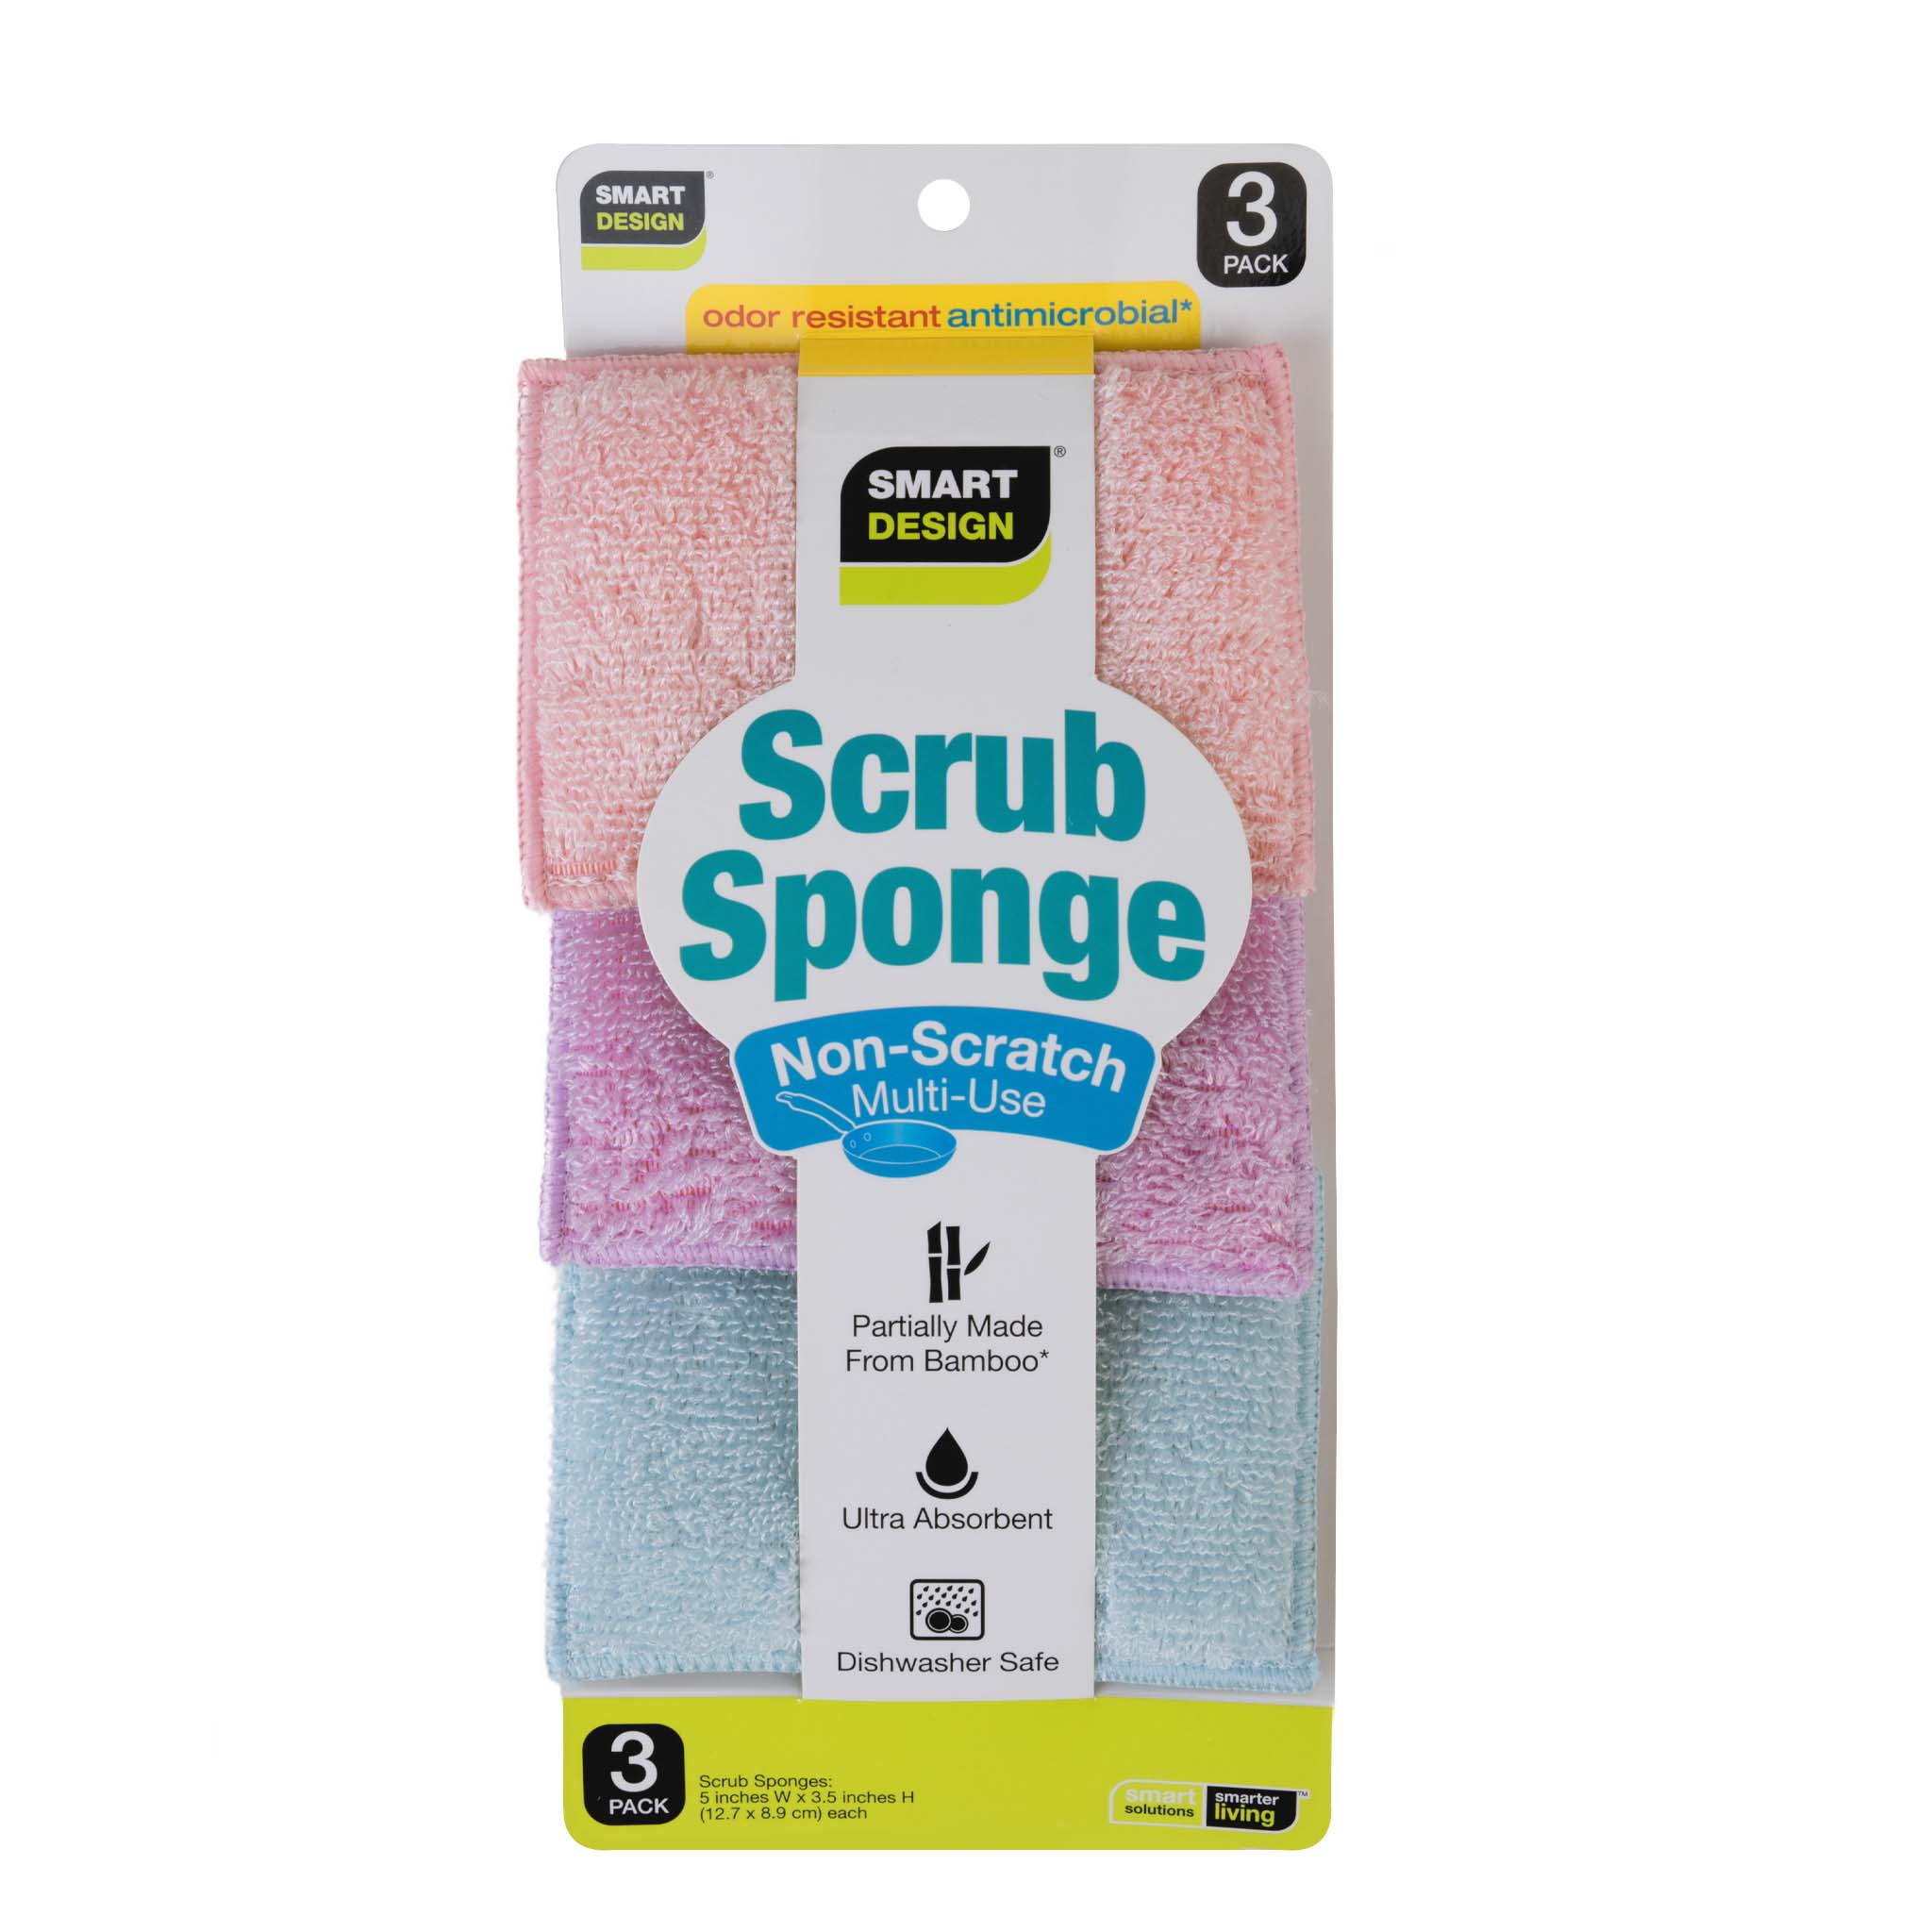 Smart Design Non Scratch Scrub Sponge with Bamboo Odorless Rayon Fiber - Set of 9 - Ultra Absorbent - Soft and Scrubber Side - Cleaning, Dishes, and